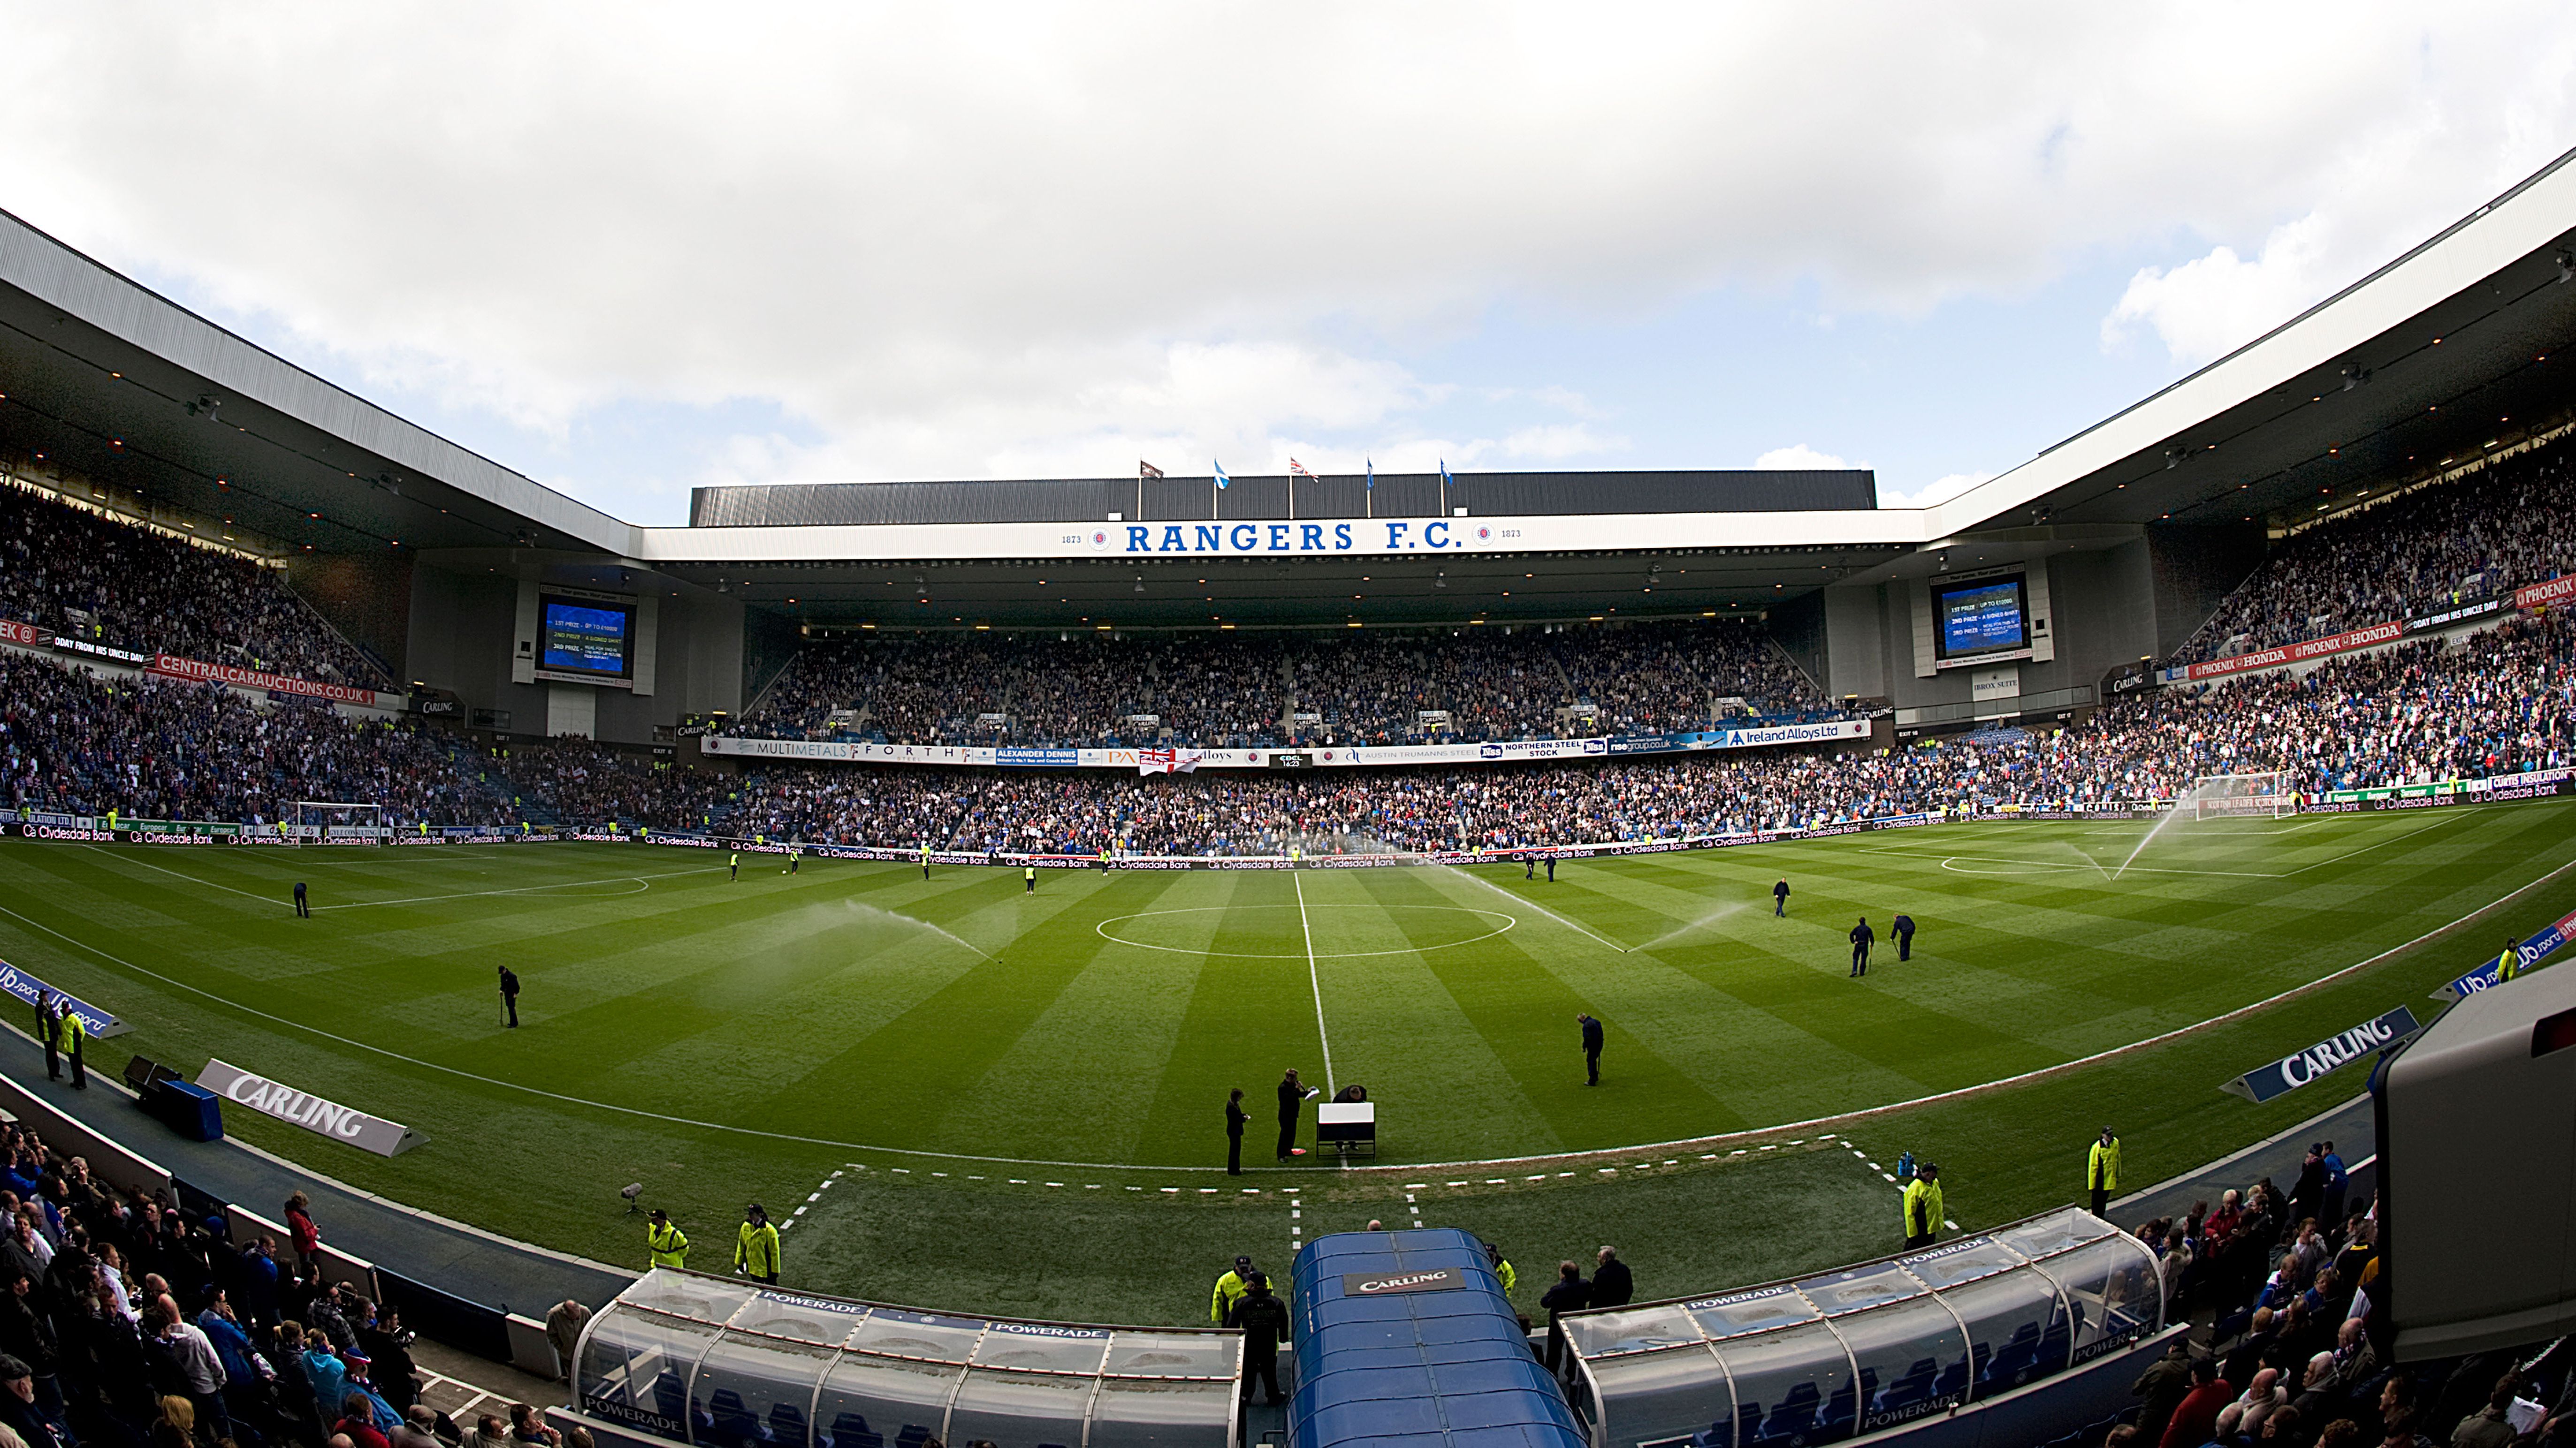 Rangers confirm capacity crowds going forward